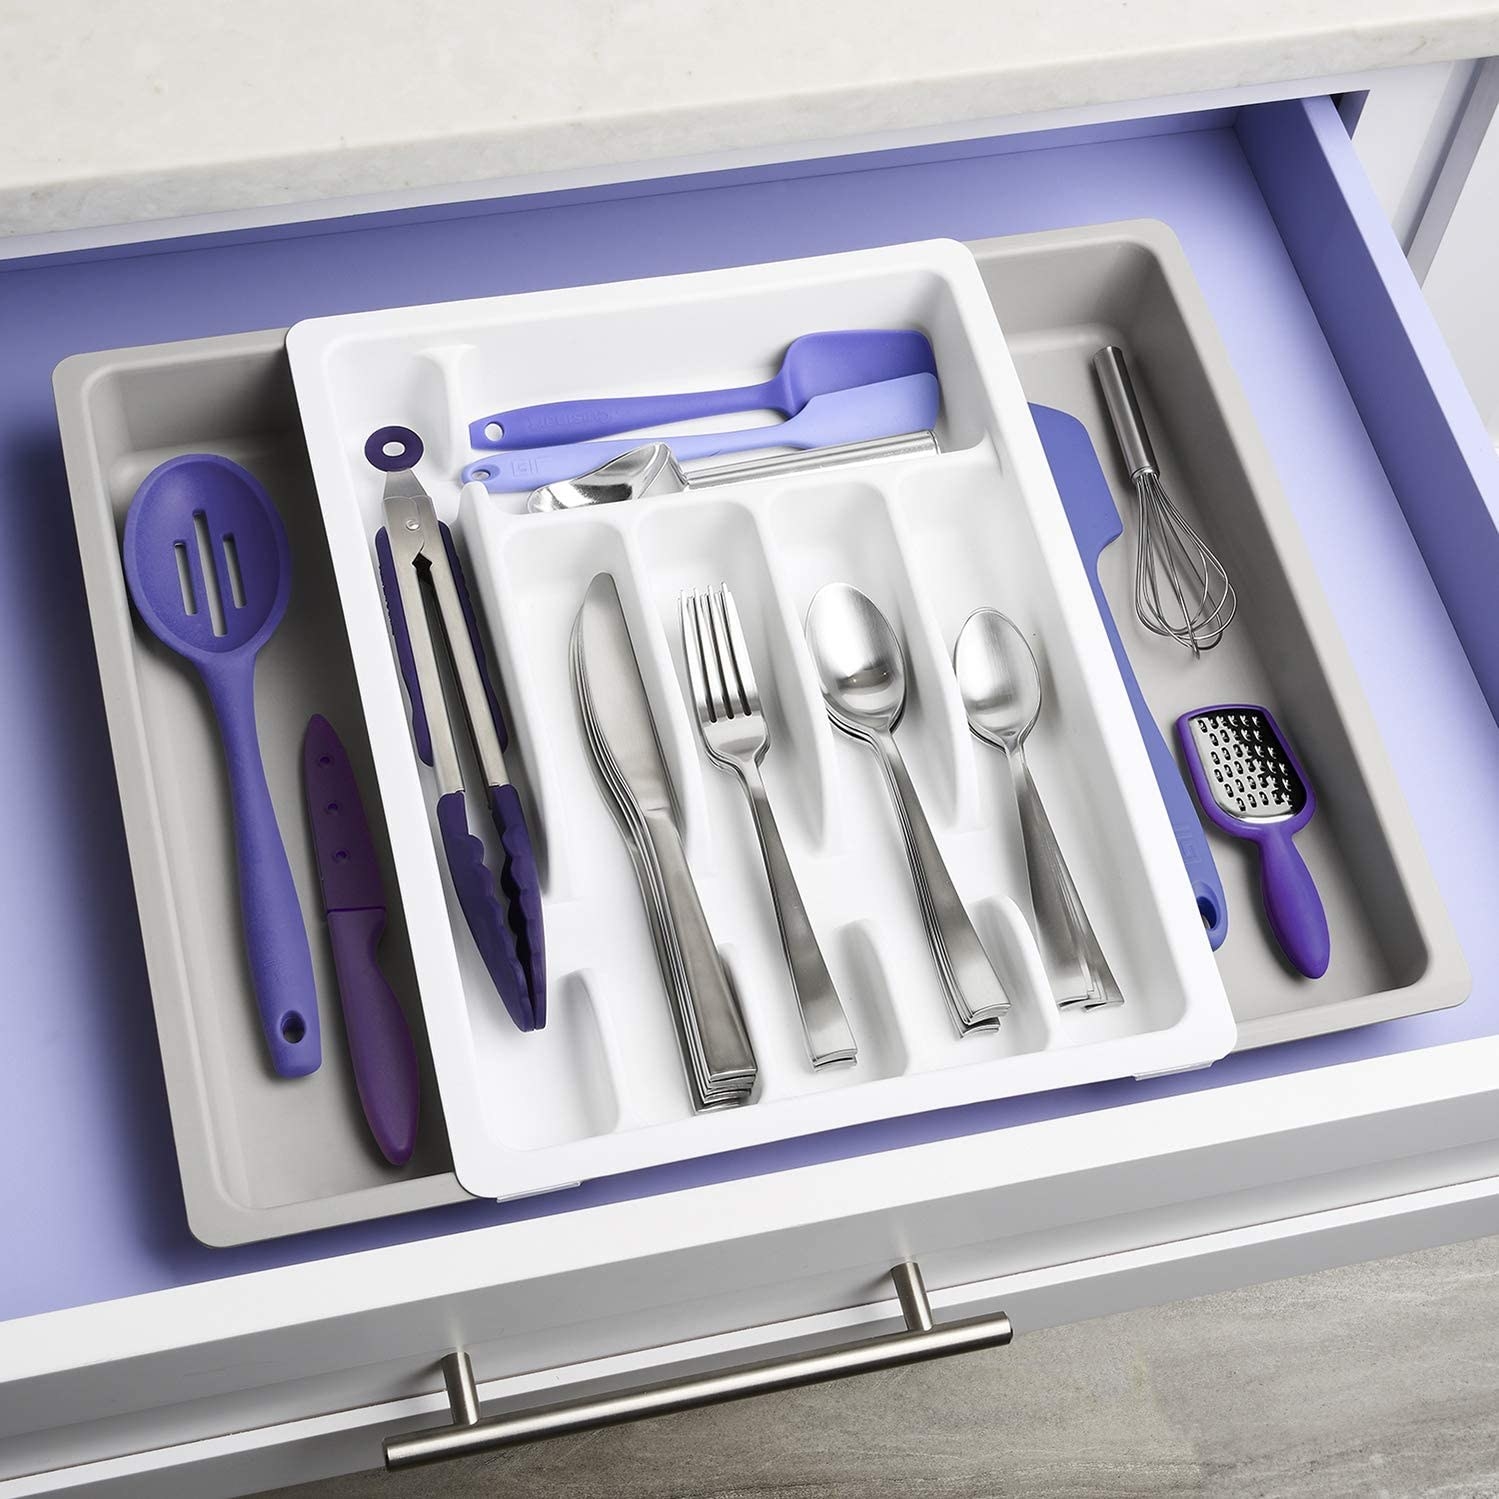 An expandable utensil tray in a drawer with utensils inside